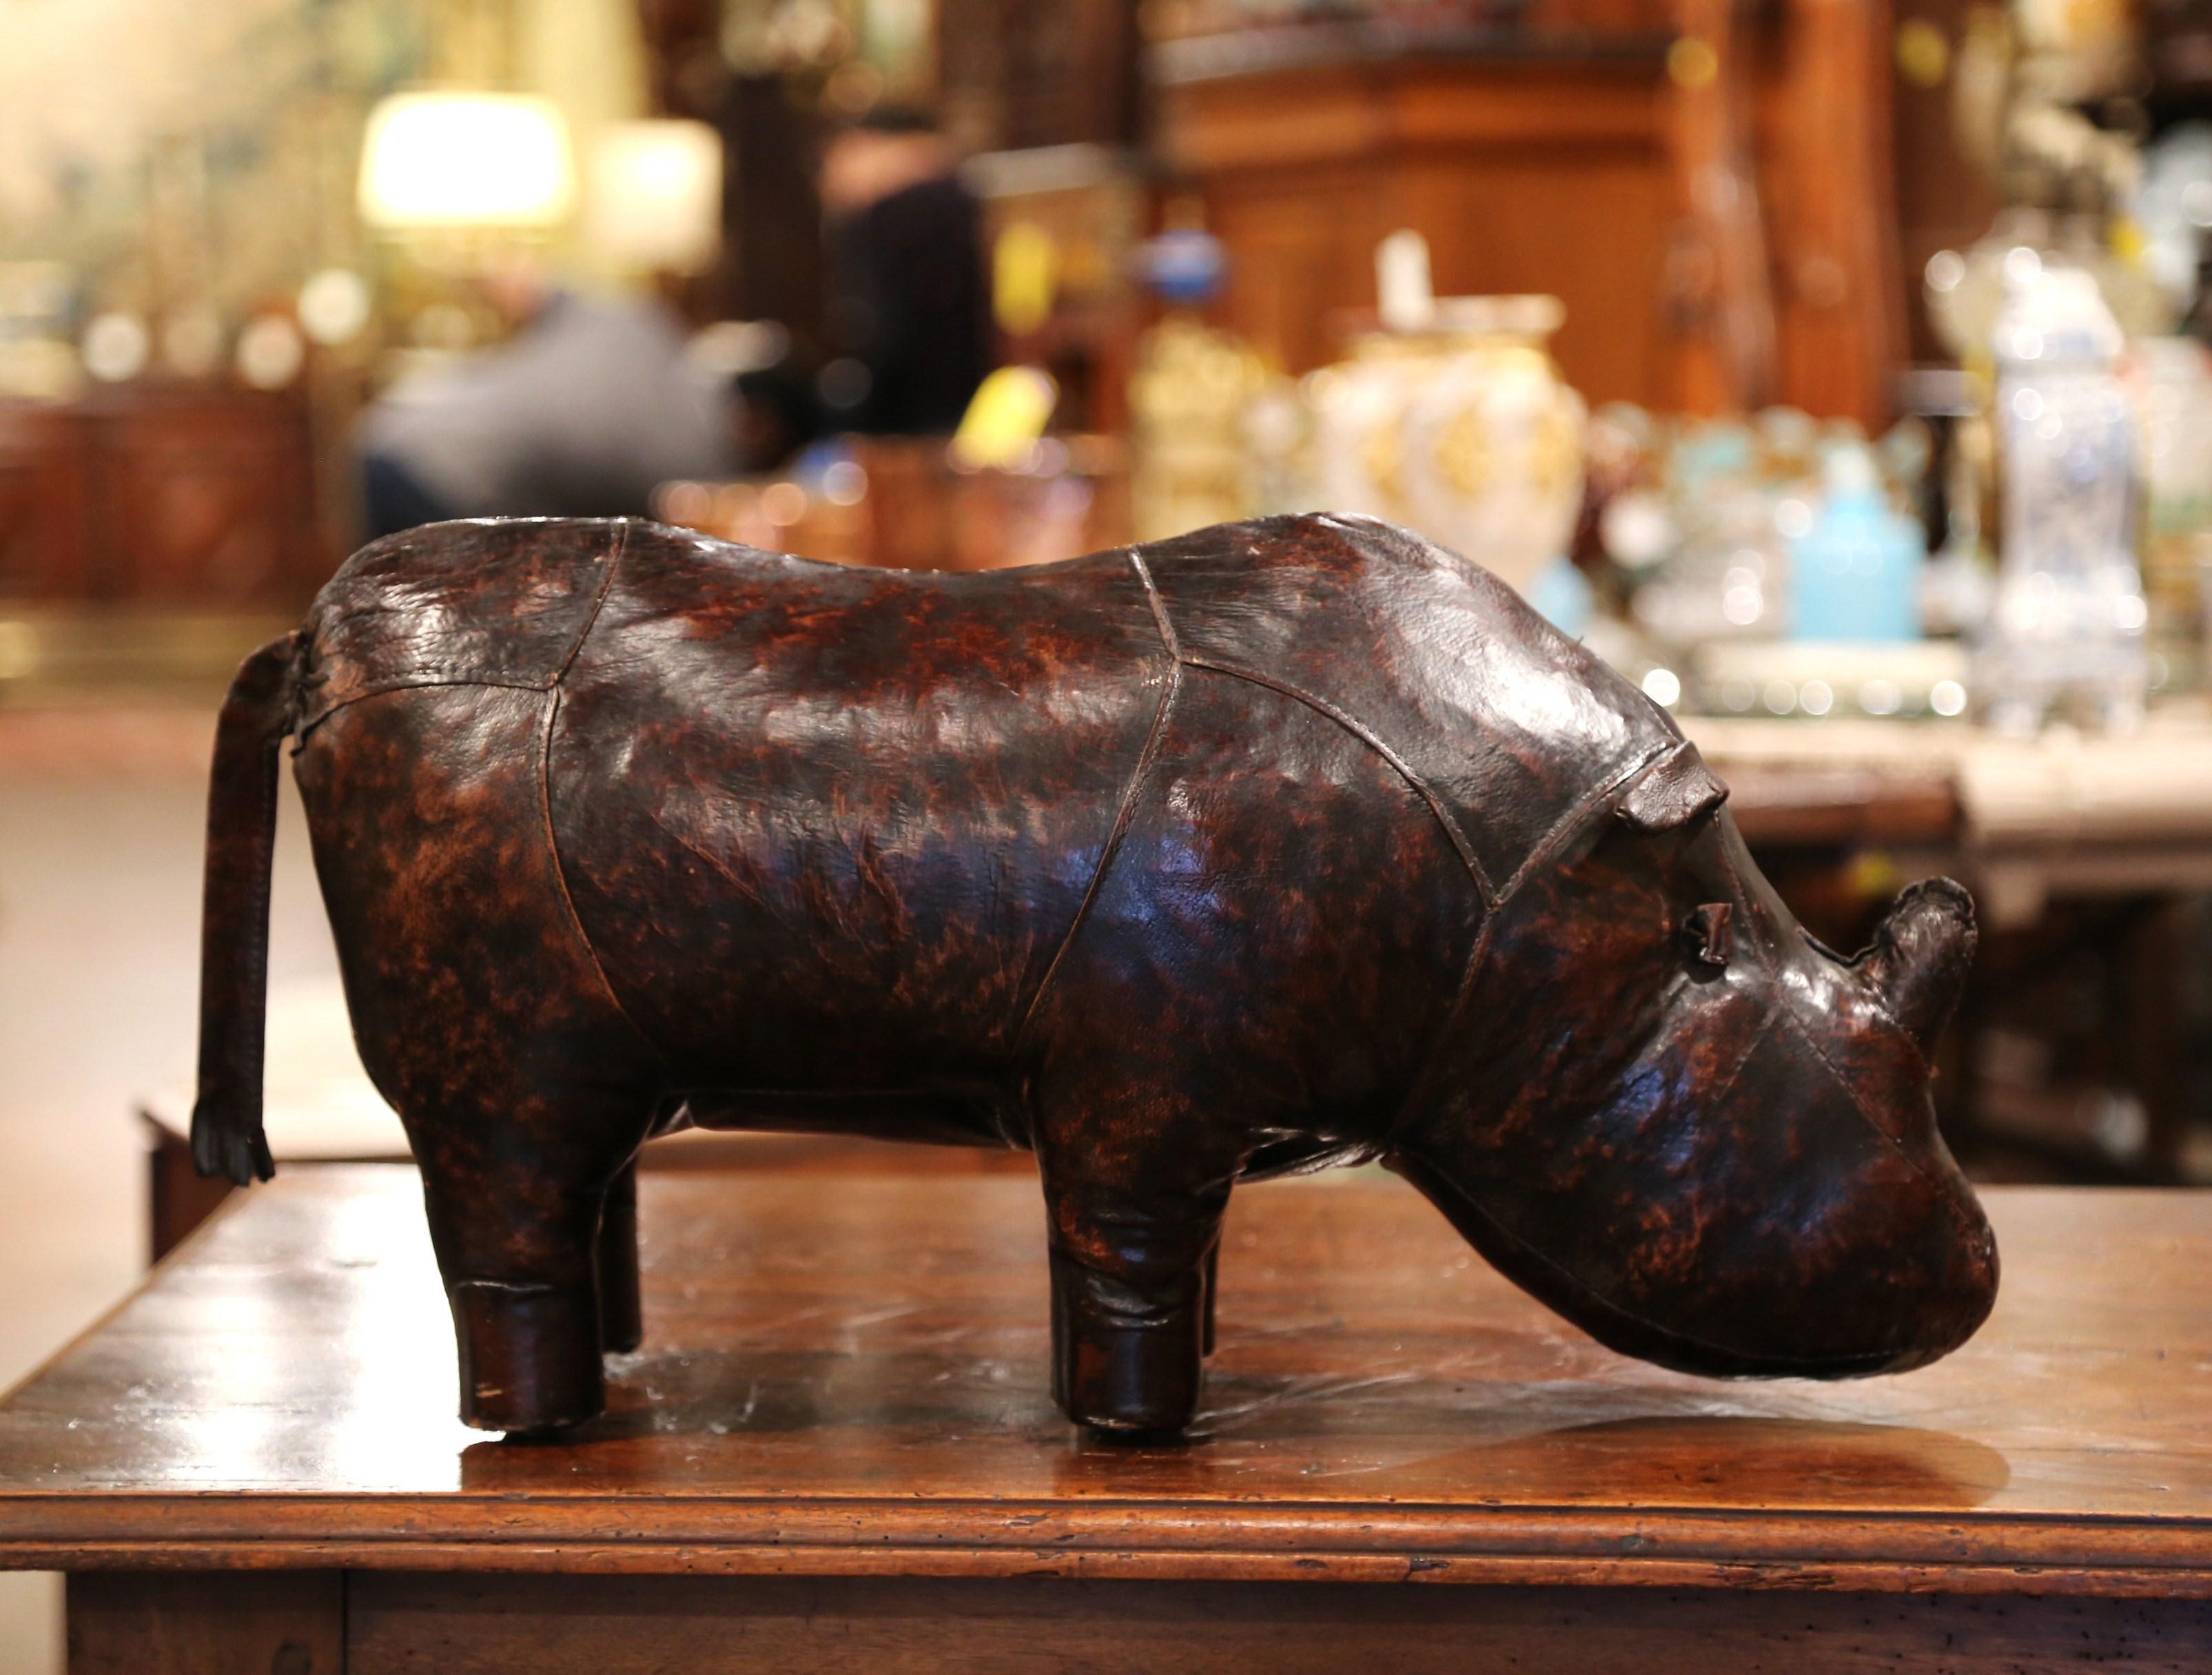 Hand-Crafted Early 20th Century English Footstool Rhino Sculpture with Original Brown Leather